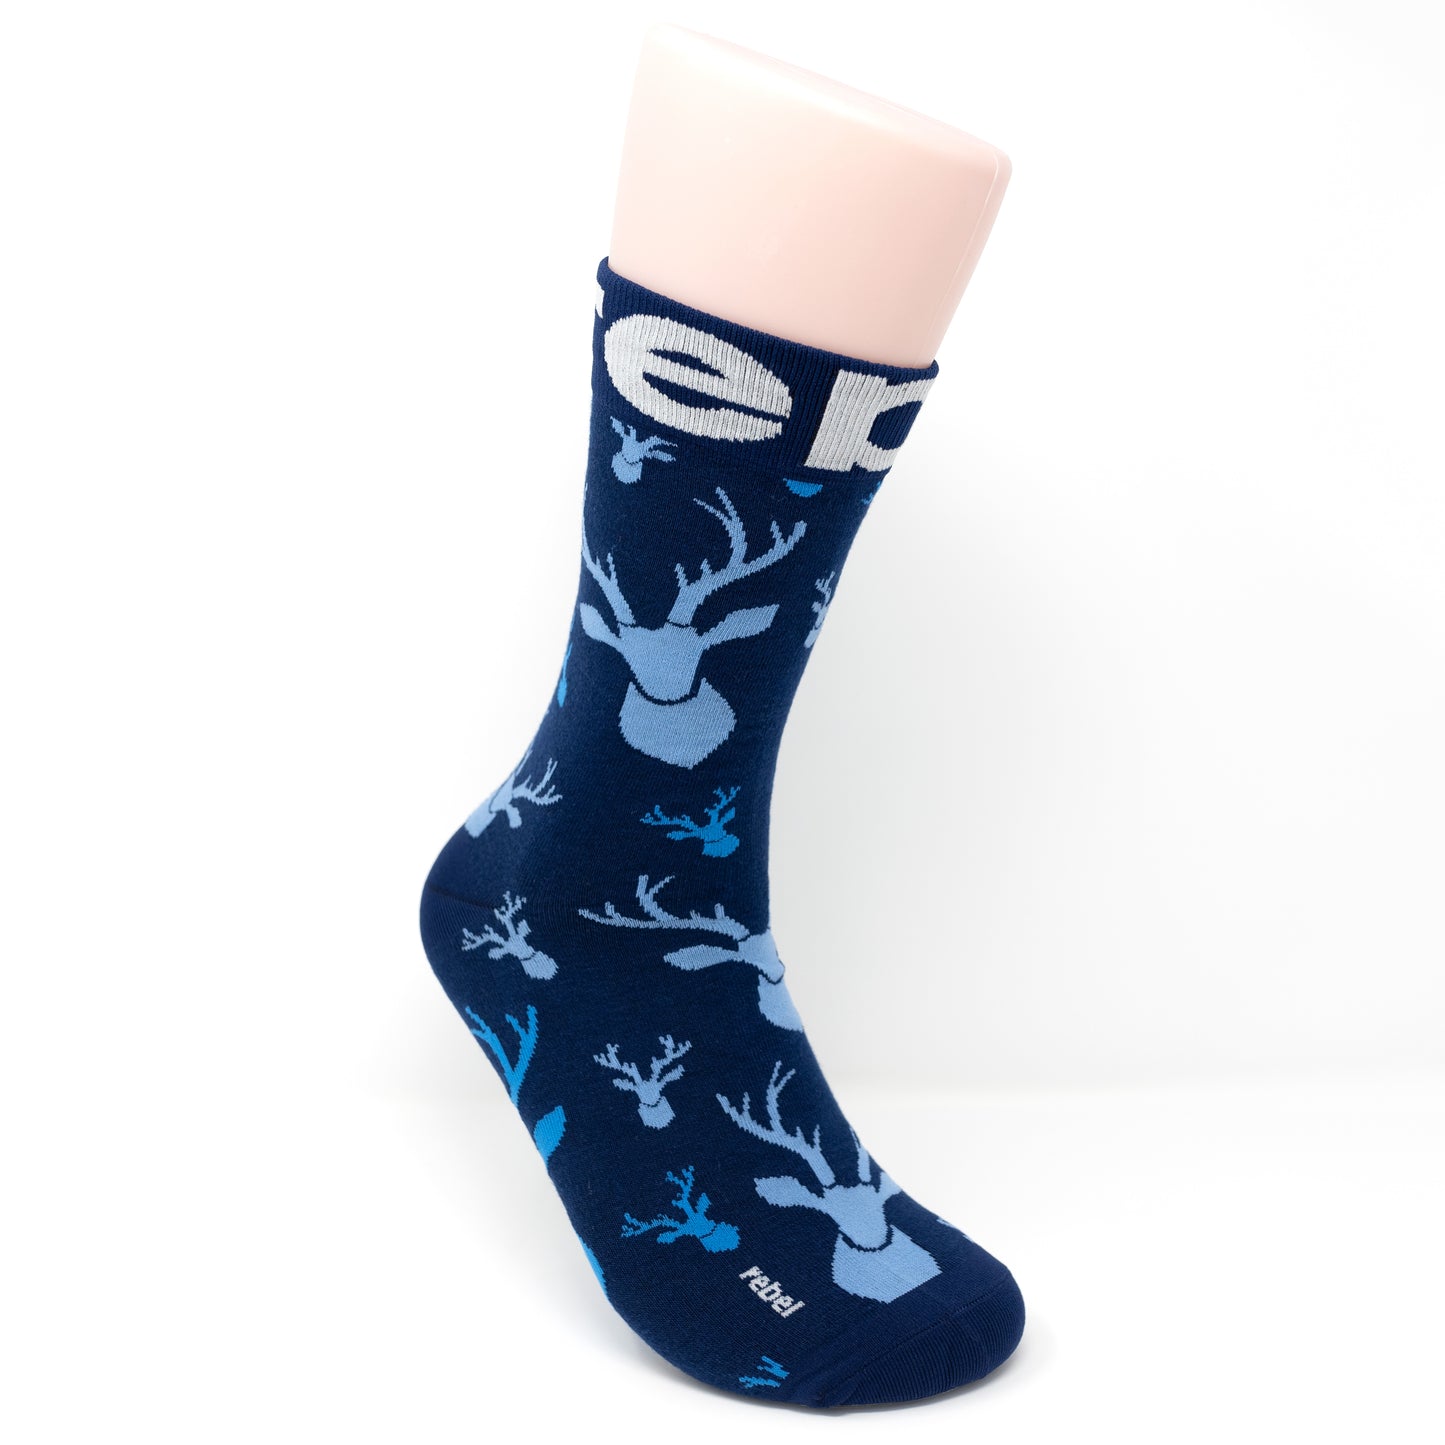 Featuring a unique and stylish blue deer design, these socks are perfect for anyone who loves to stand out from the crowd.